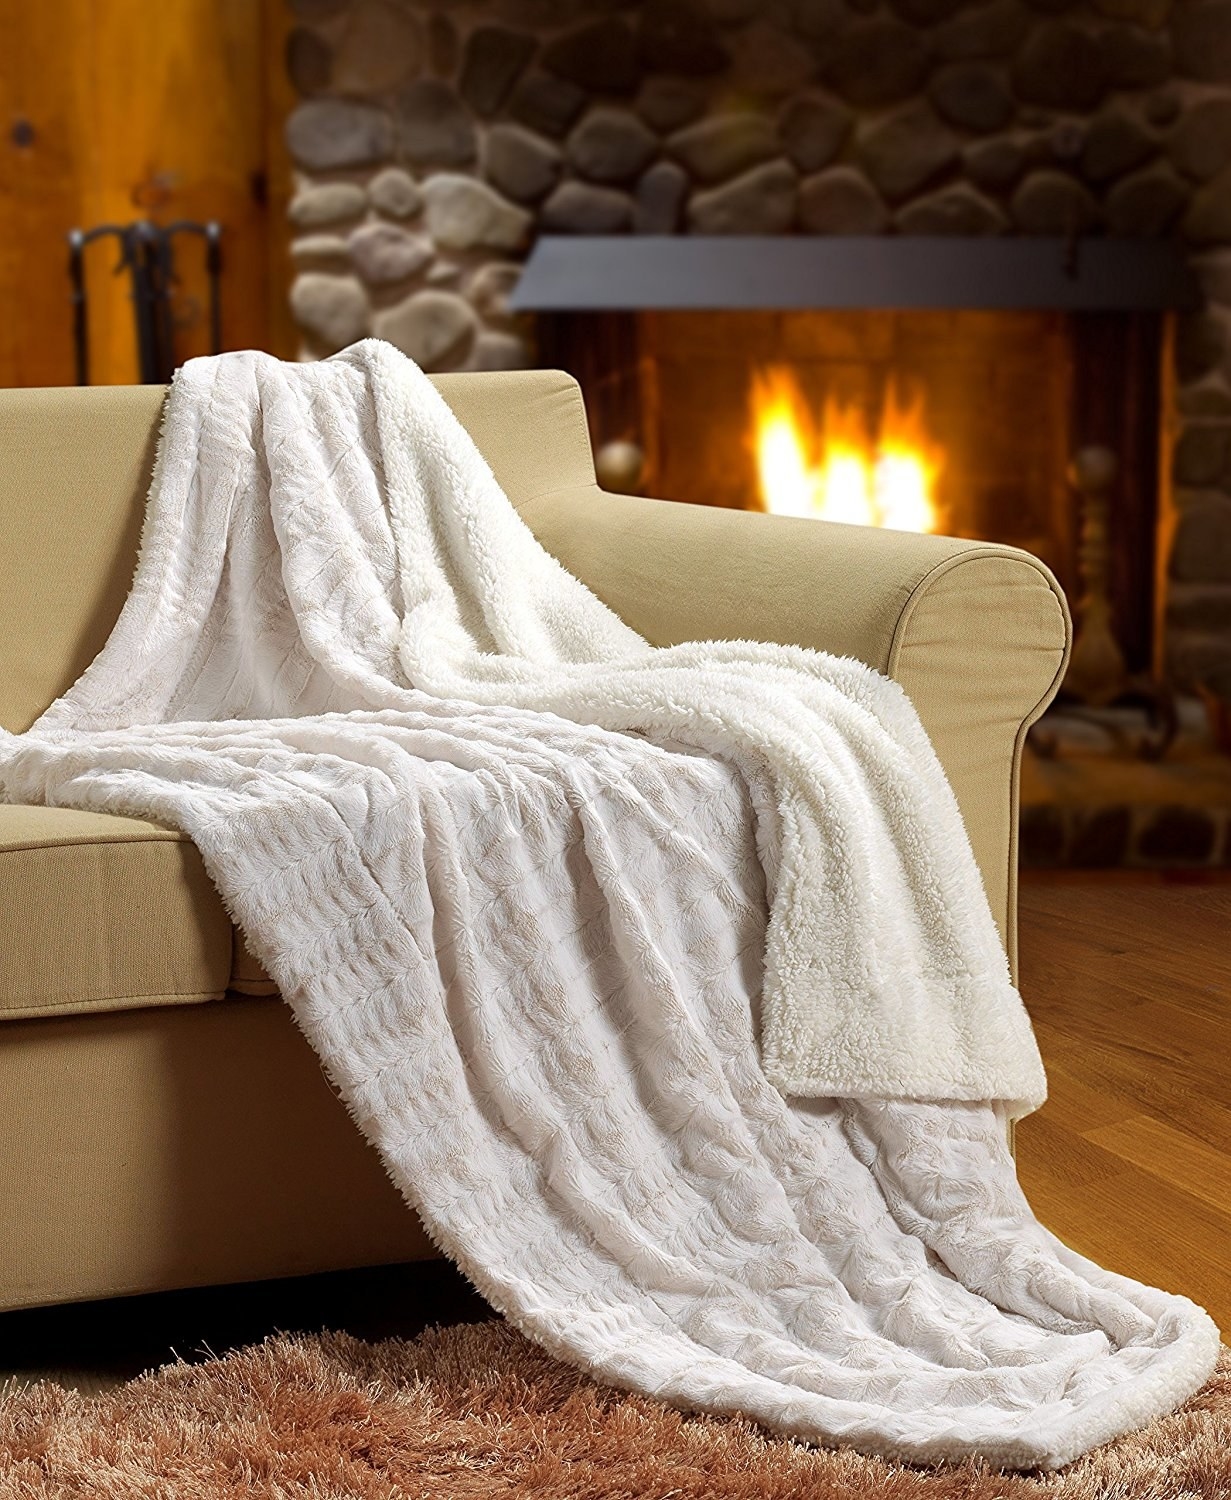 white faux fur fuzzy looking throw on a couch in front of a fire